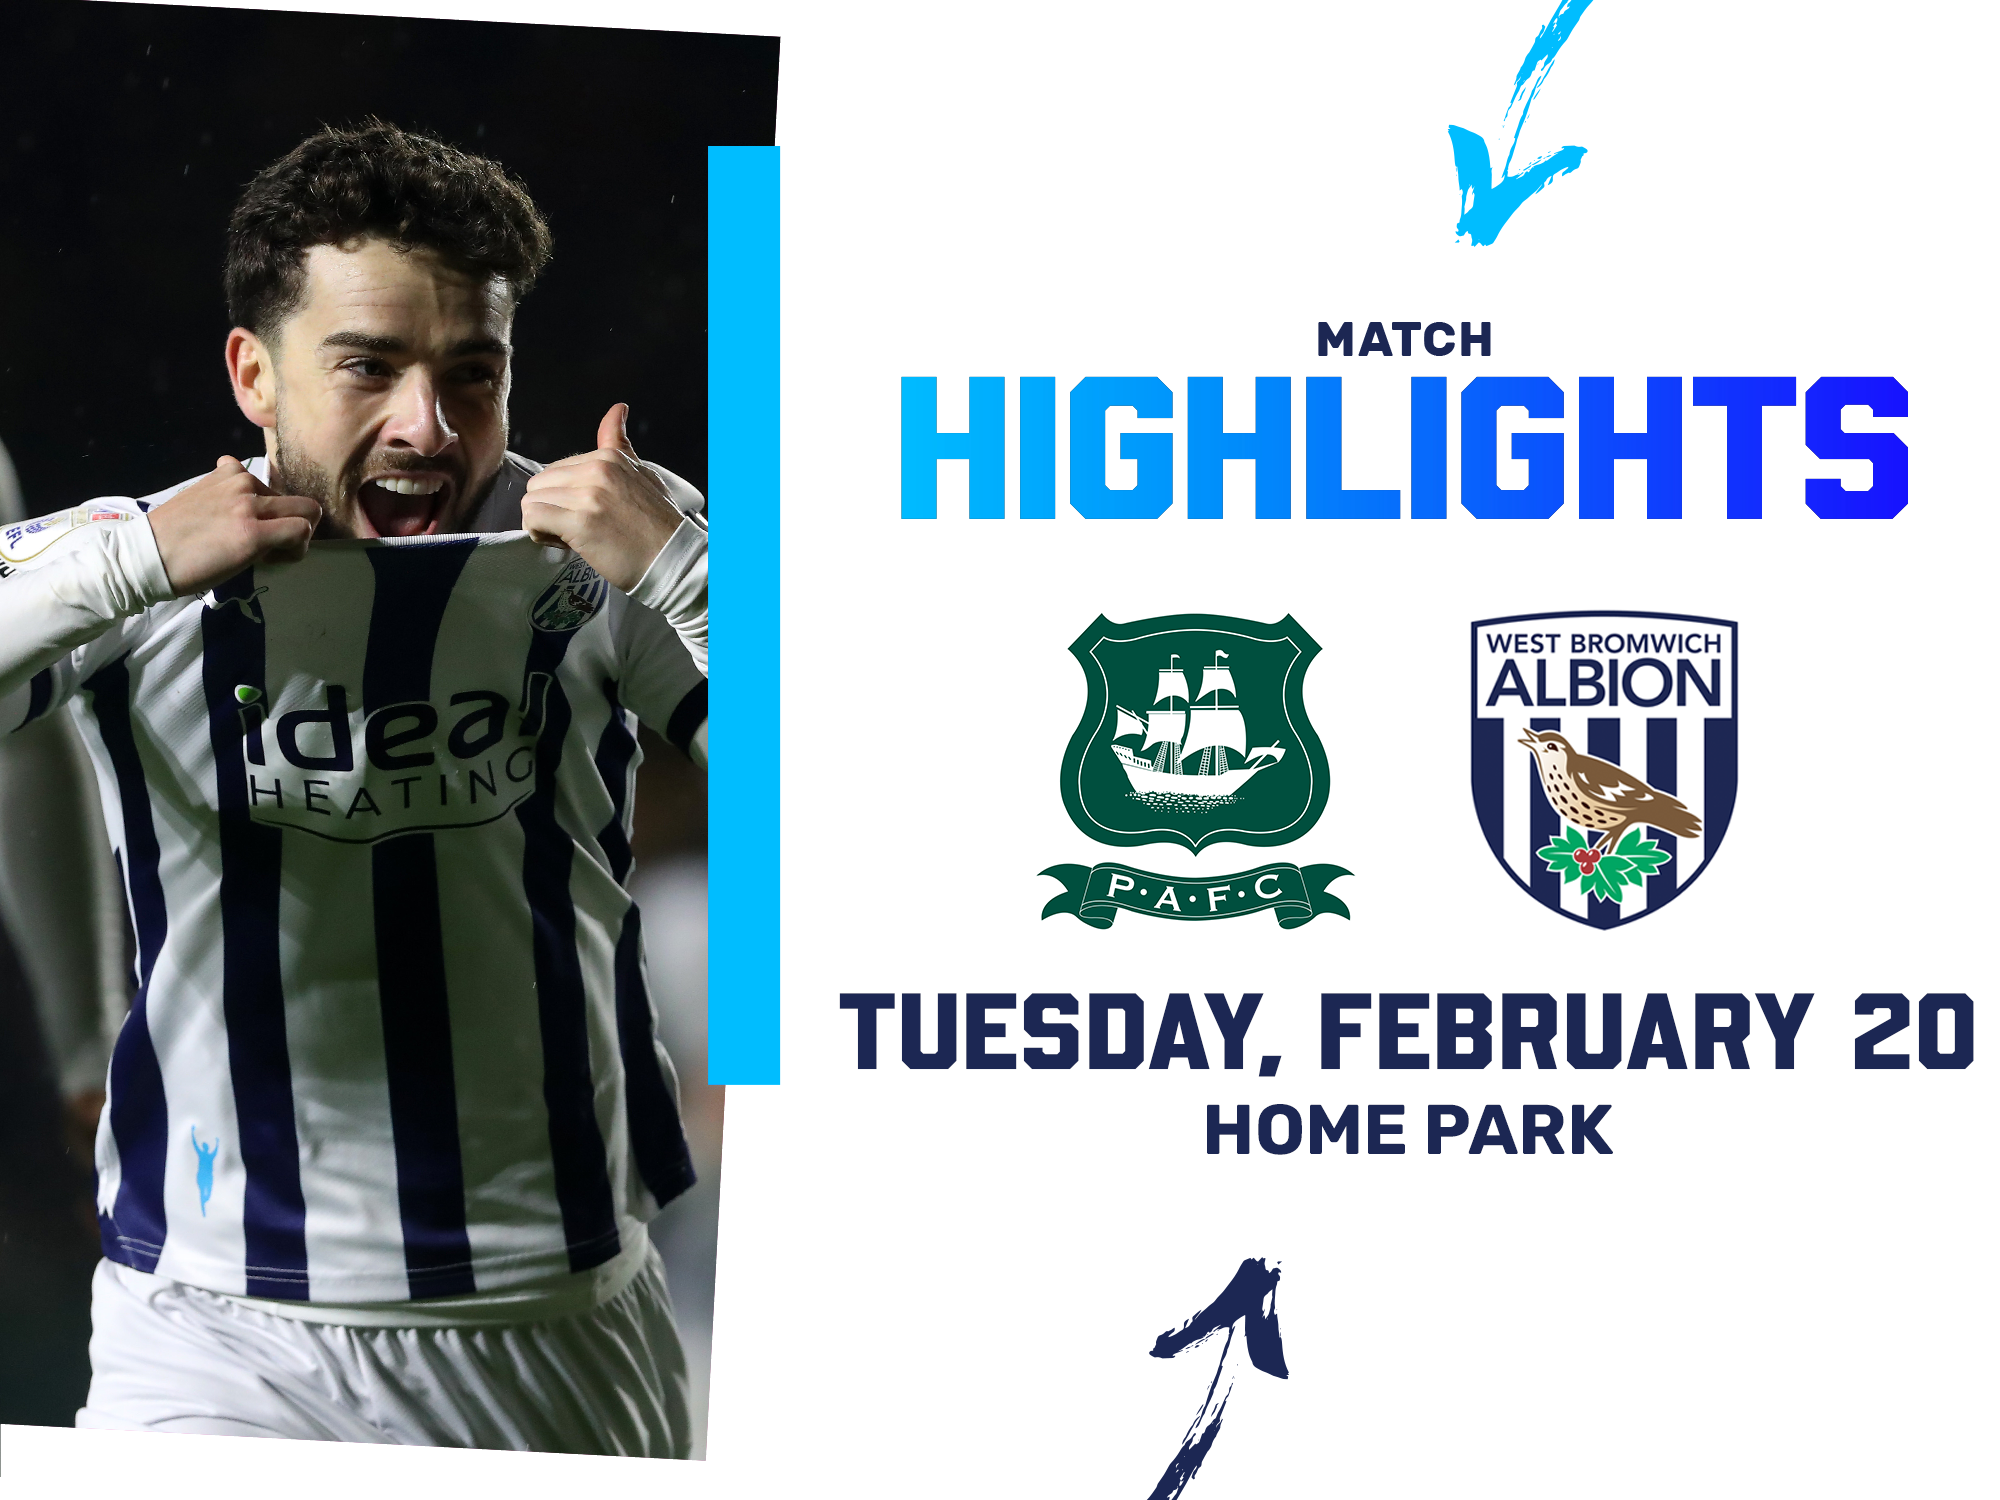 A match highlights photo graphic, showing Mikey Johnston celebrating, with the club crests of Albion and Plymouth